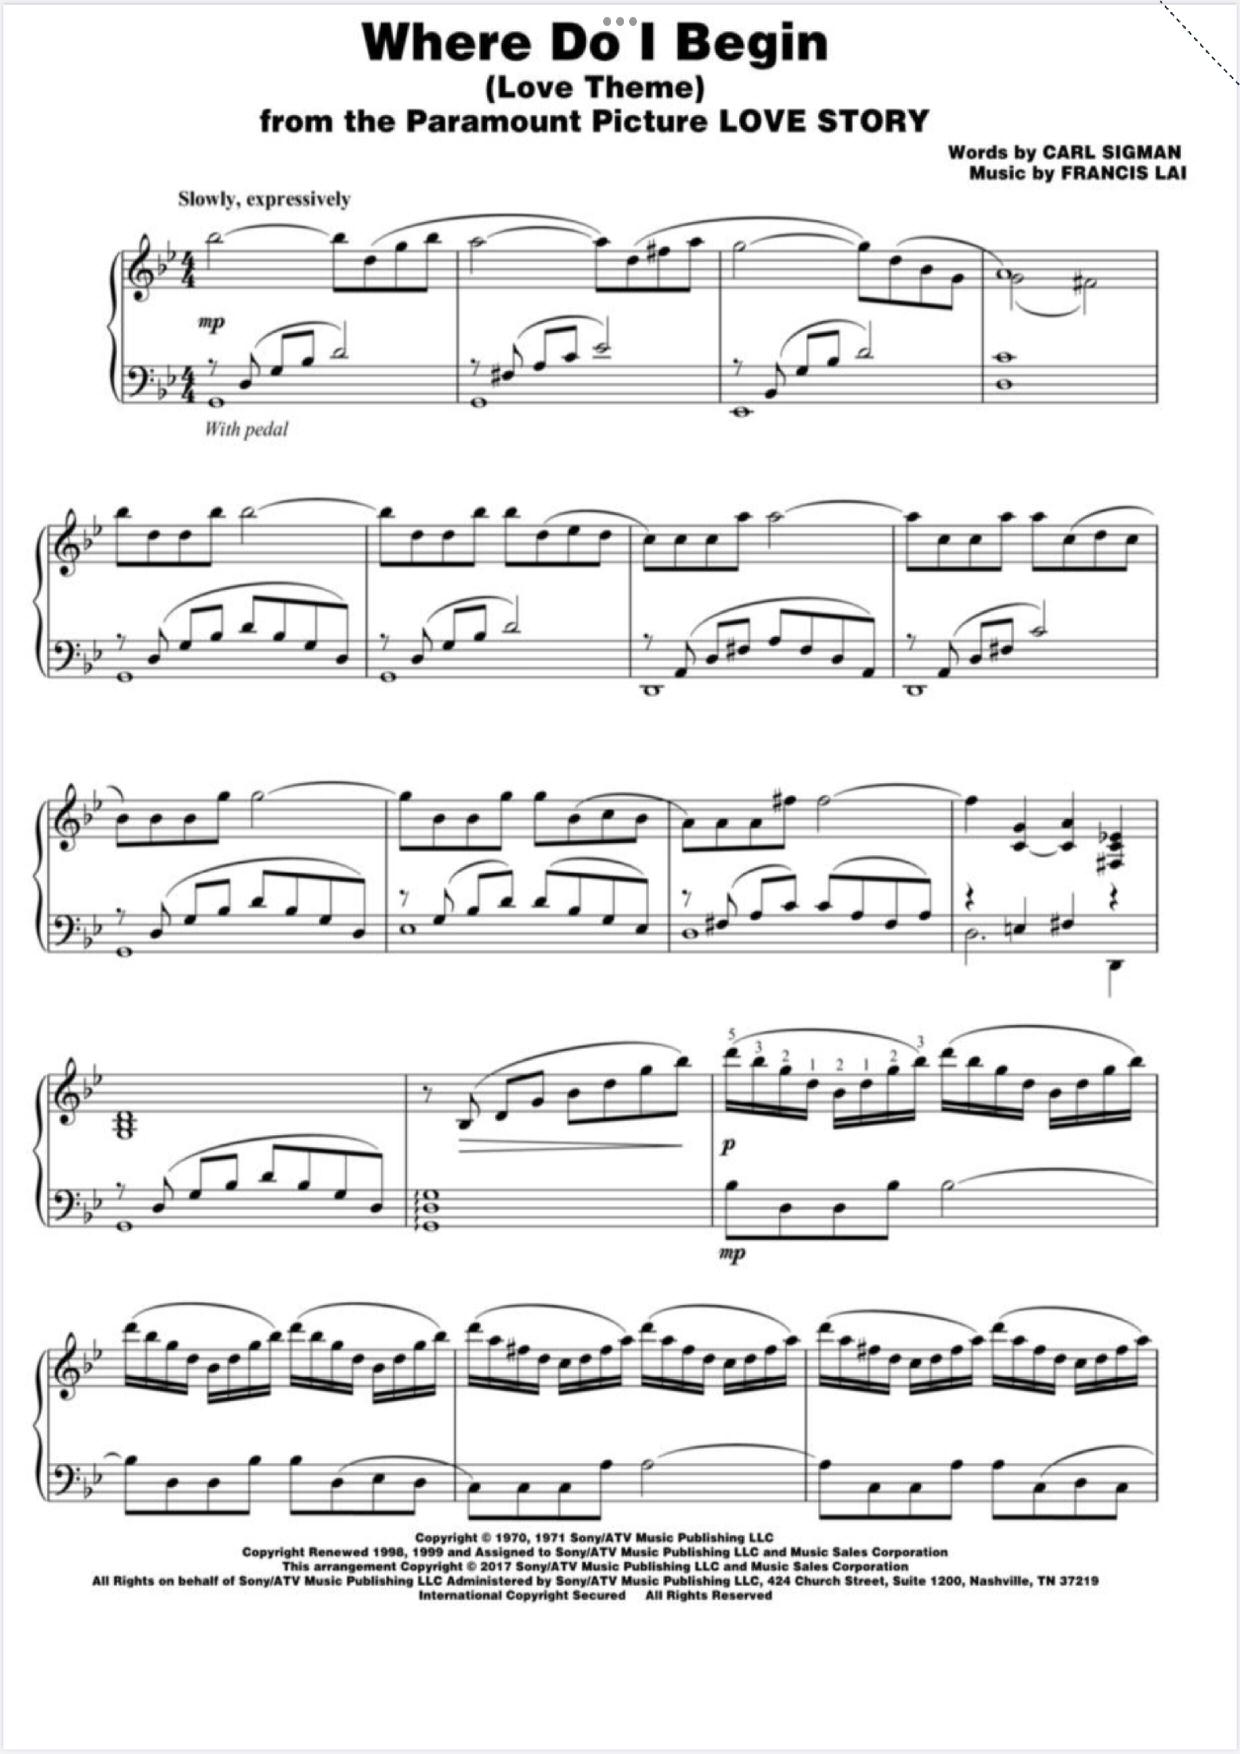 ☆ Where Do I Begin - Love Theme From \"Love Story\" - Music / Piano Score Free PDF Download - HK Pop Piano Academy ☆